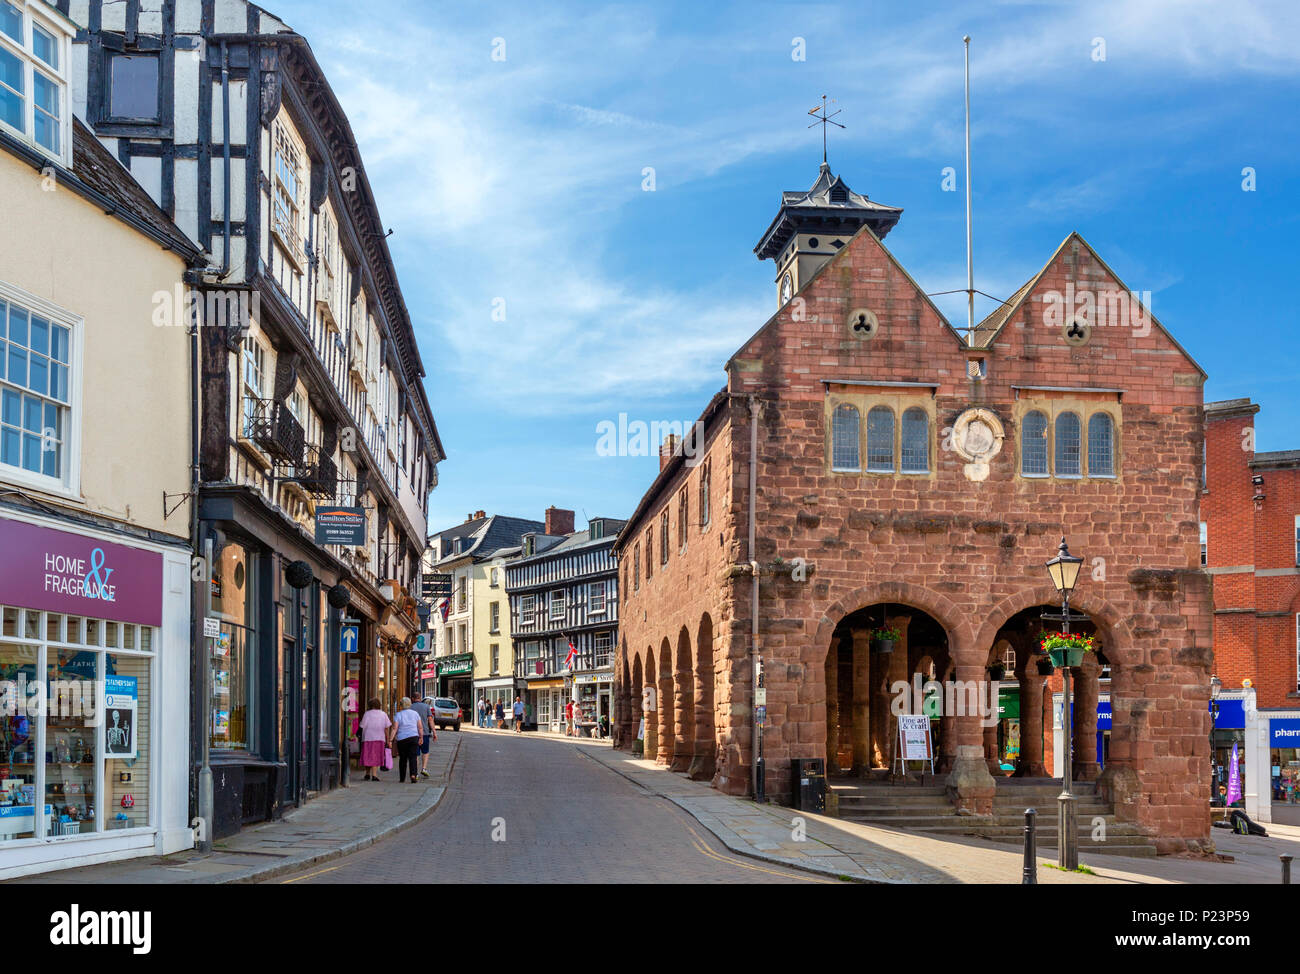 The Market House and shops in the town centre, Ross-on-Wye, Herefordshire, England, UK Stock Photo